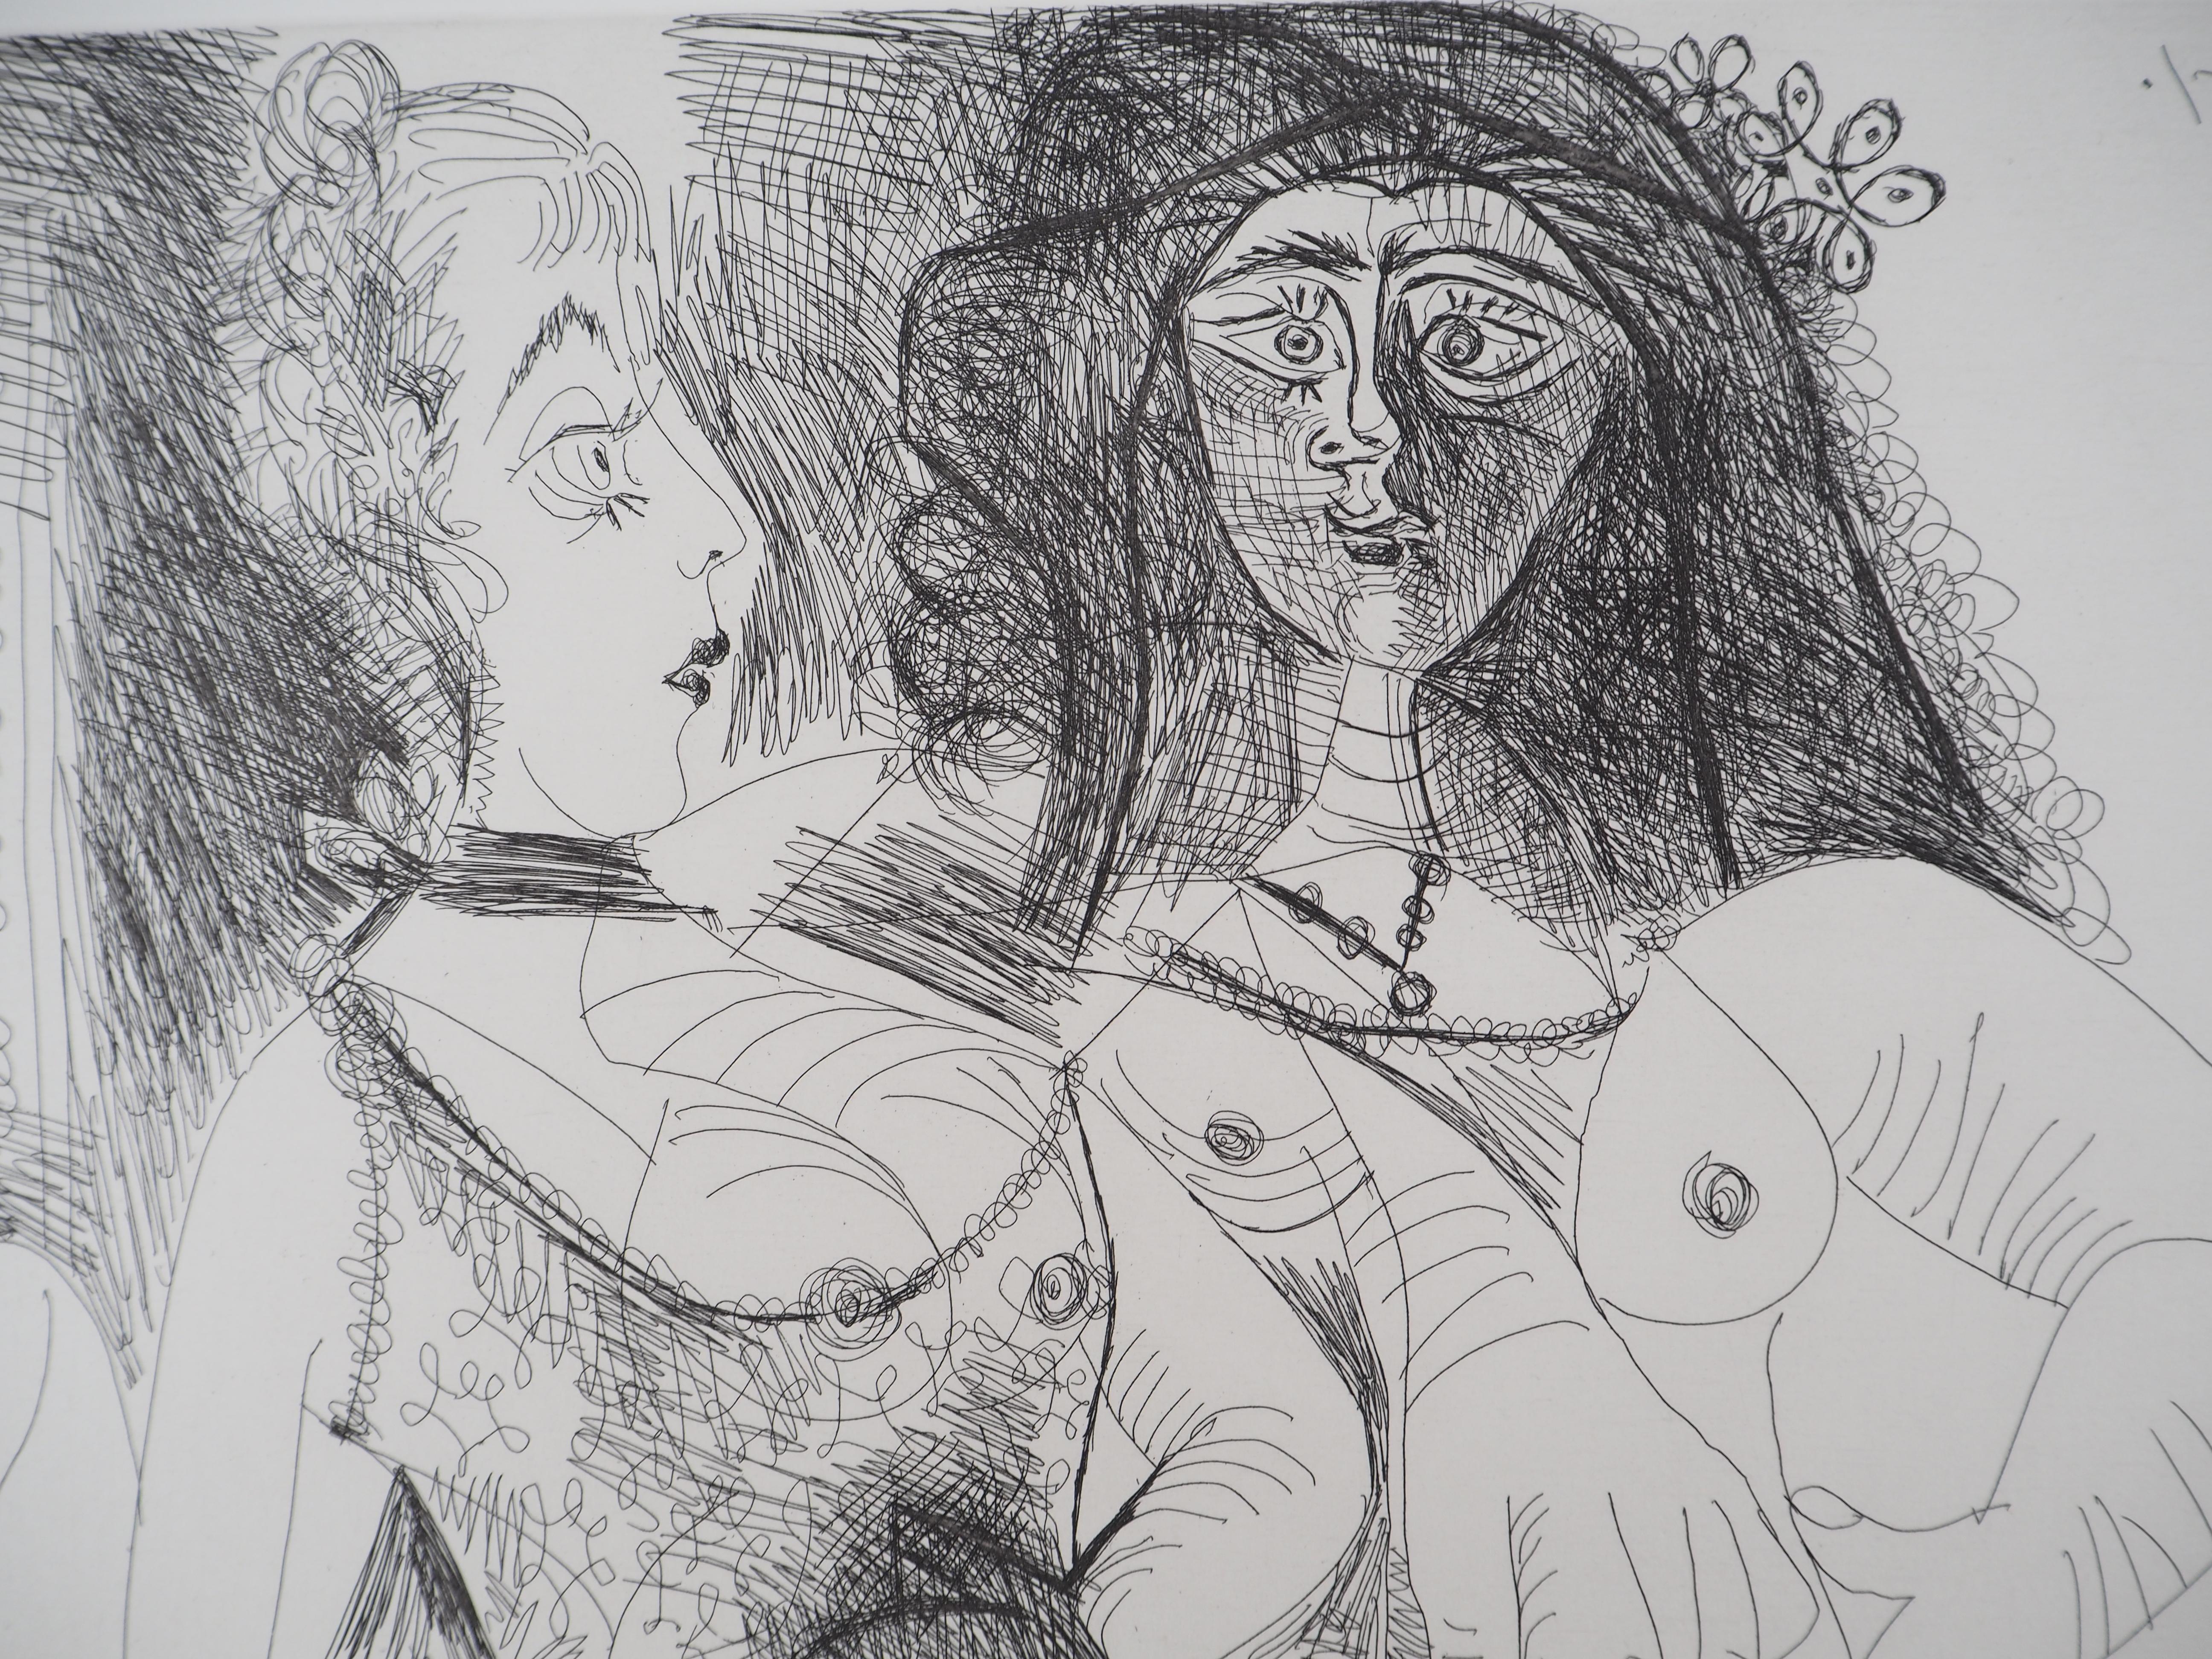 Degas with Three Nude Women - Original etching, Signed (Bloch #1981) For Sale 6